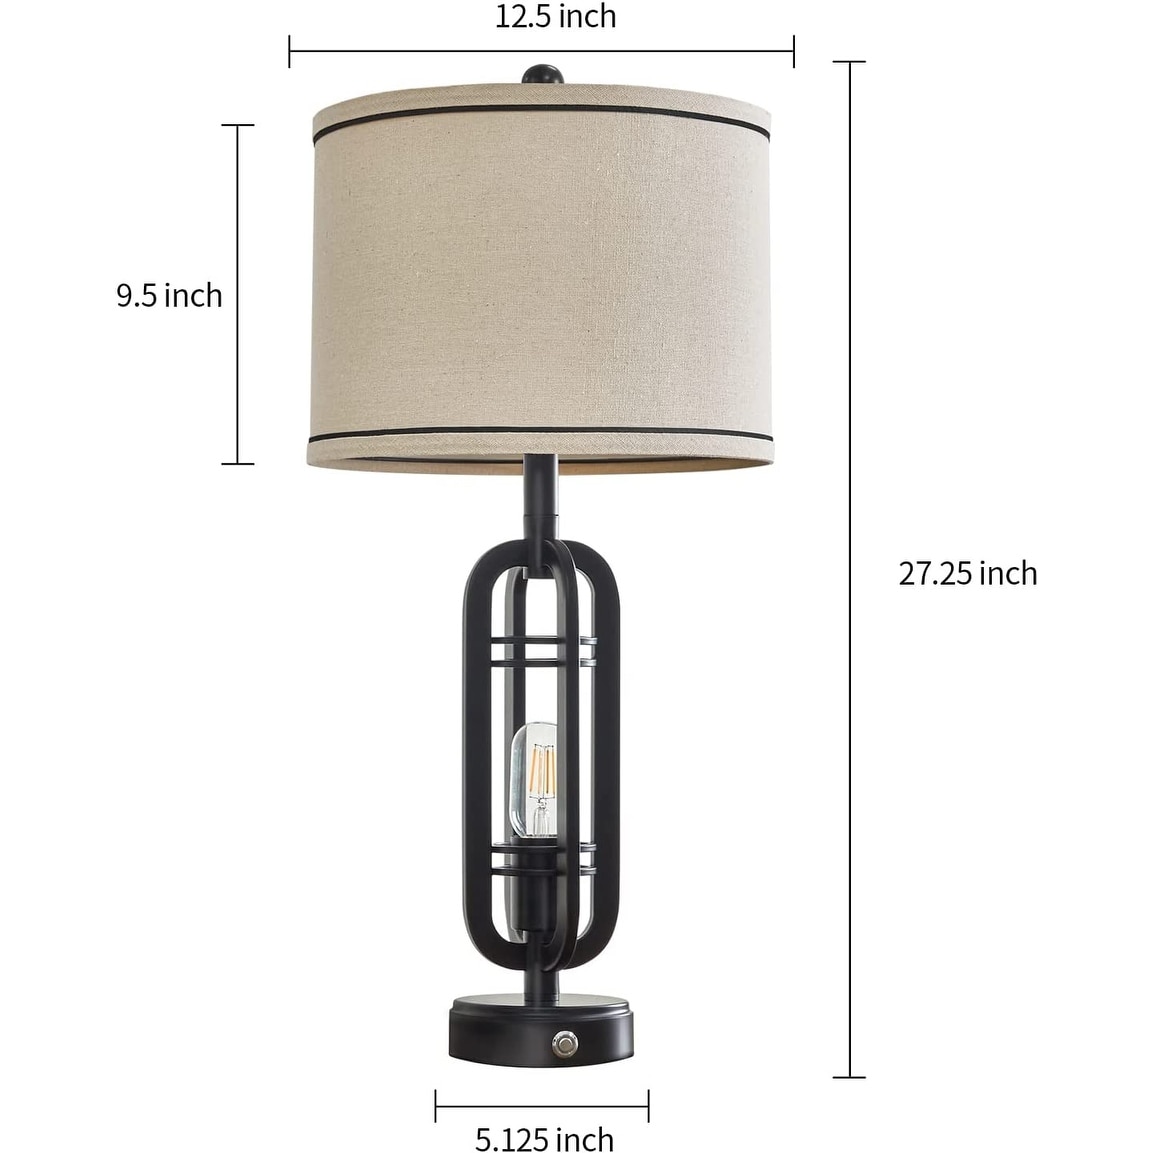 27.25 inch Industrial Table Lamp Set of with USB Ports,3 Way Dimmable  Touch Control Nightstand Lamp Vintage Modern Farmhouse Bed Bath  Beyond  37747315